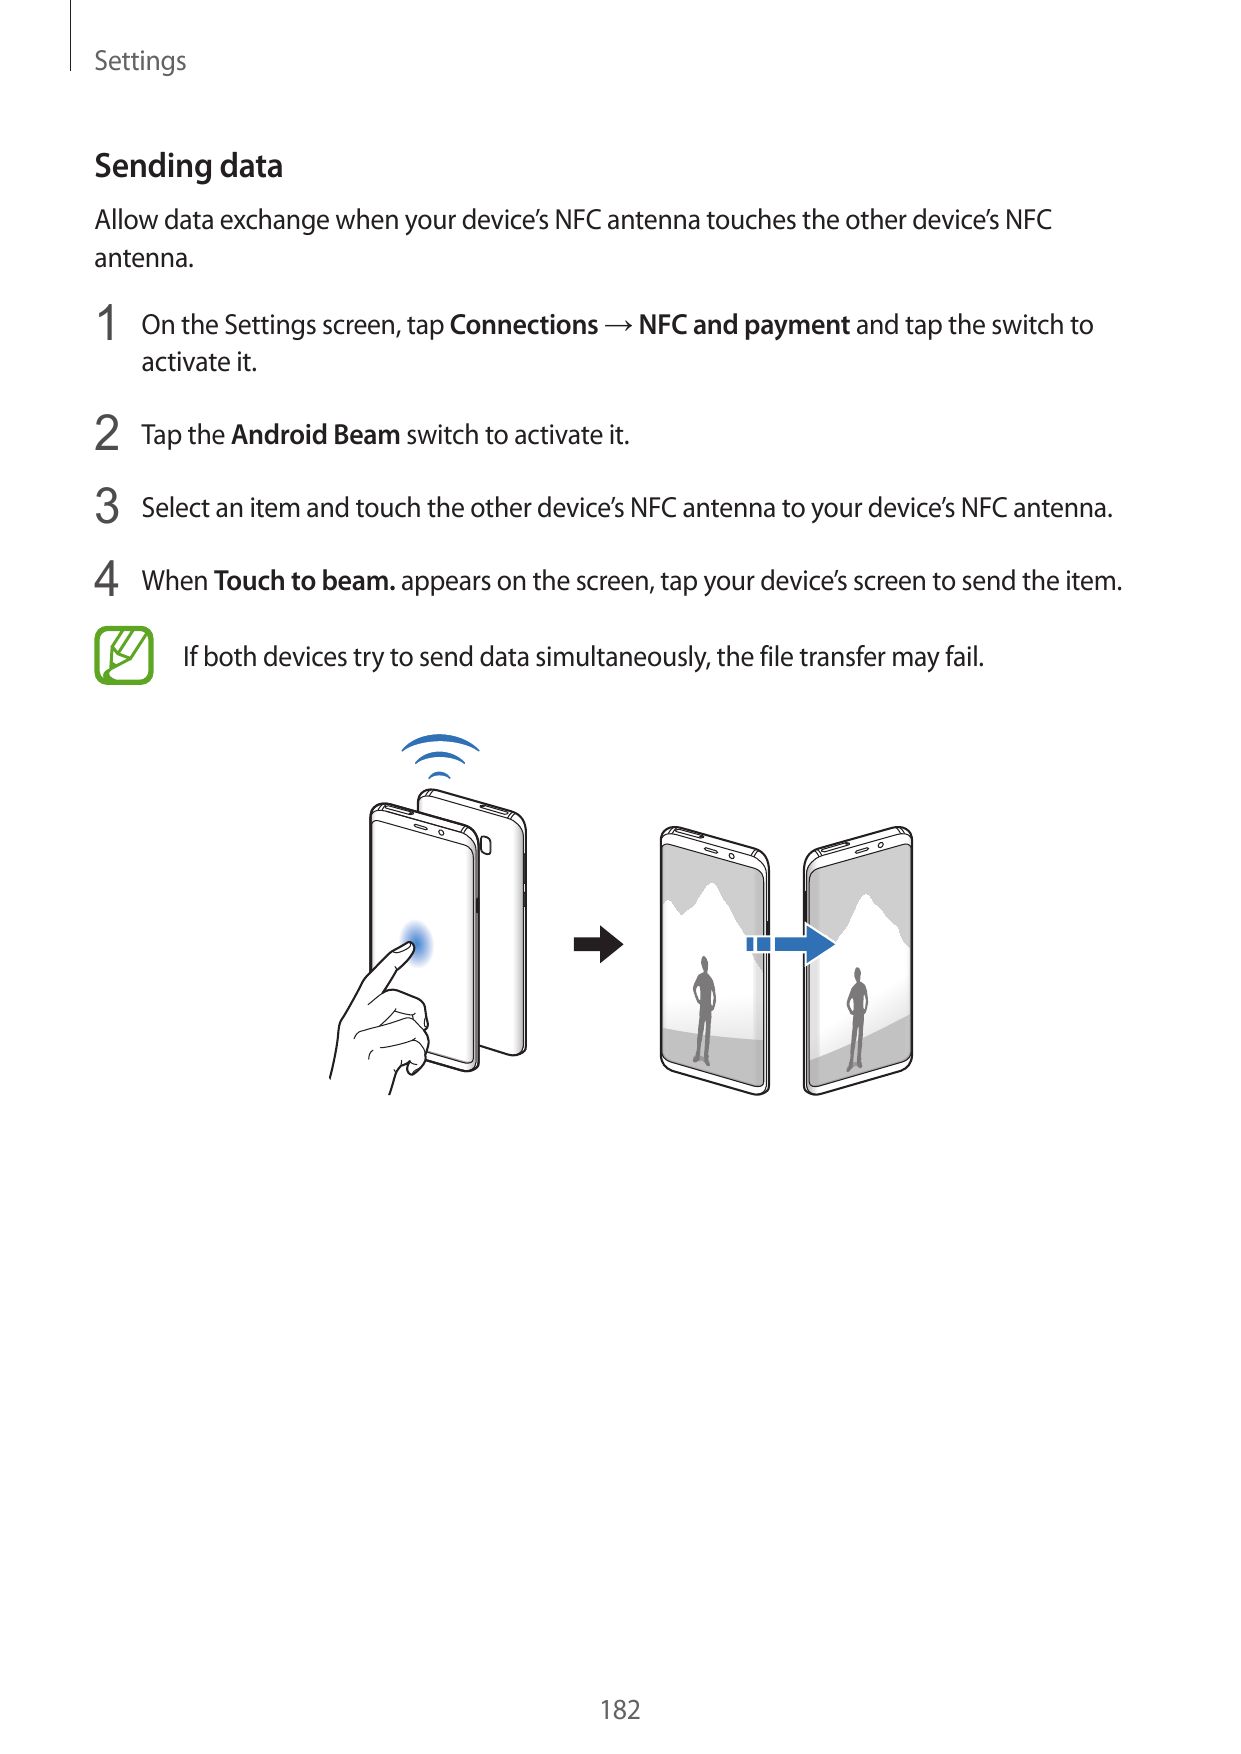 SettingsSending dataAllow data exchange when your device’s NFC antenna touches the other device’s NFCantenna.1 On the Settings s